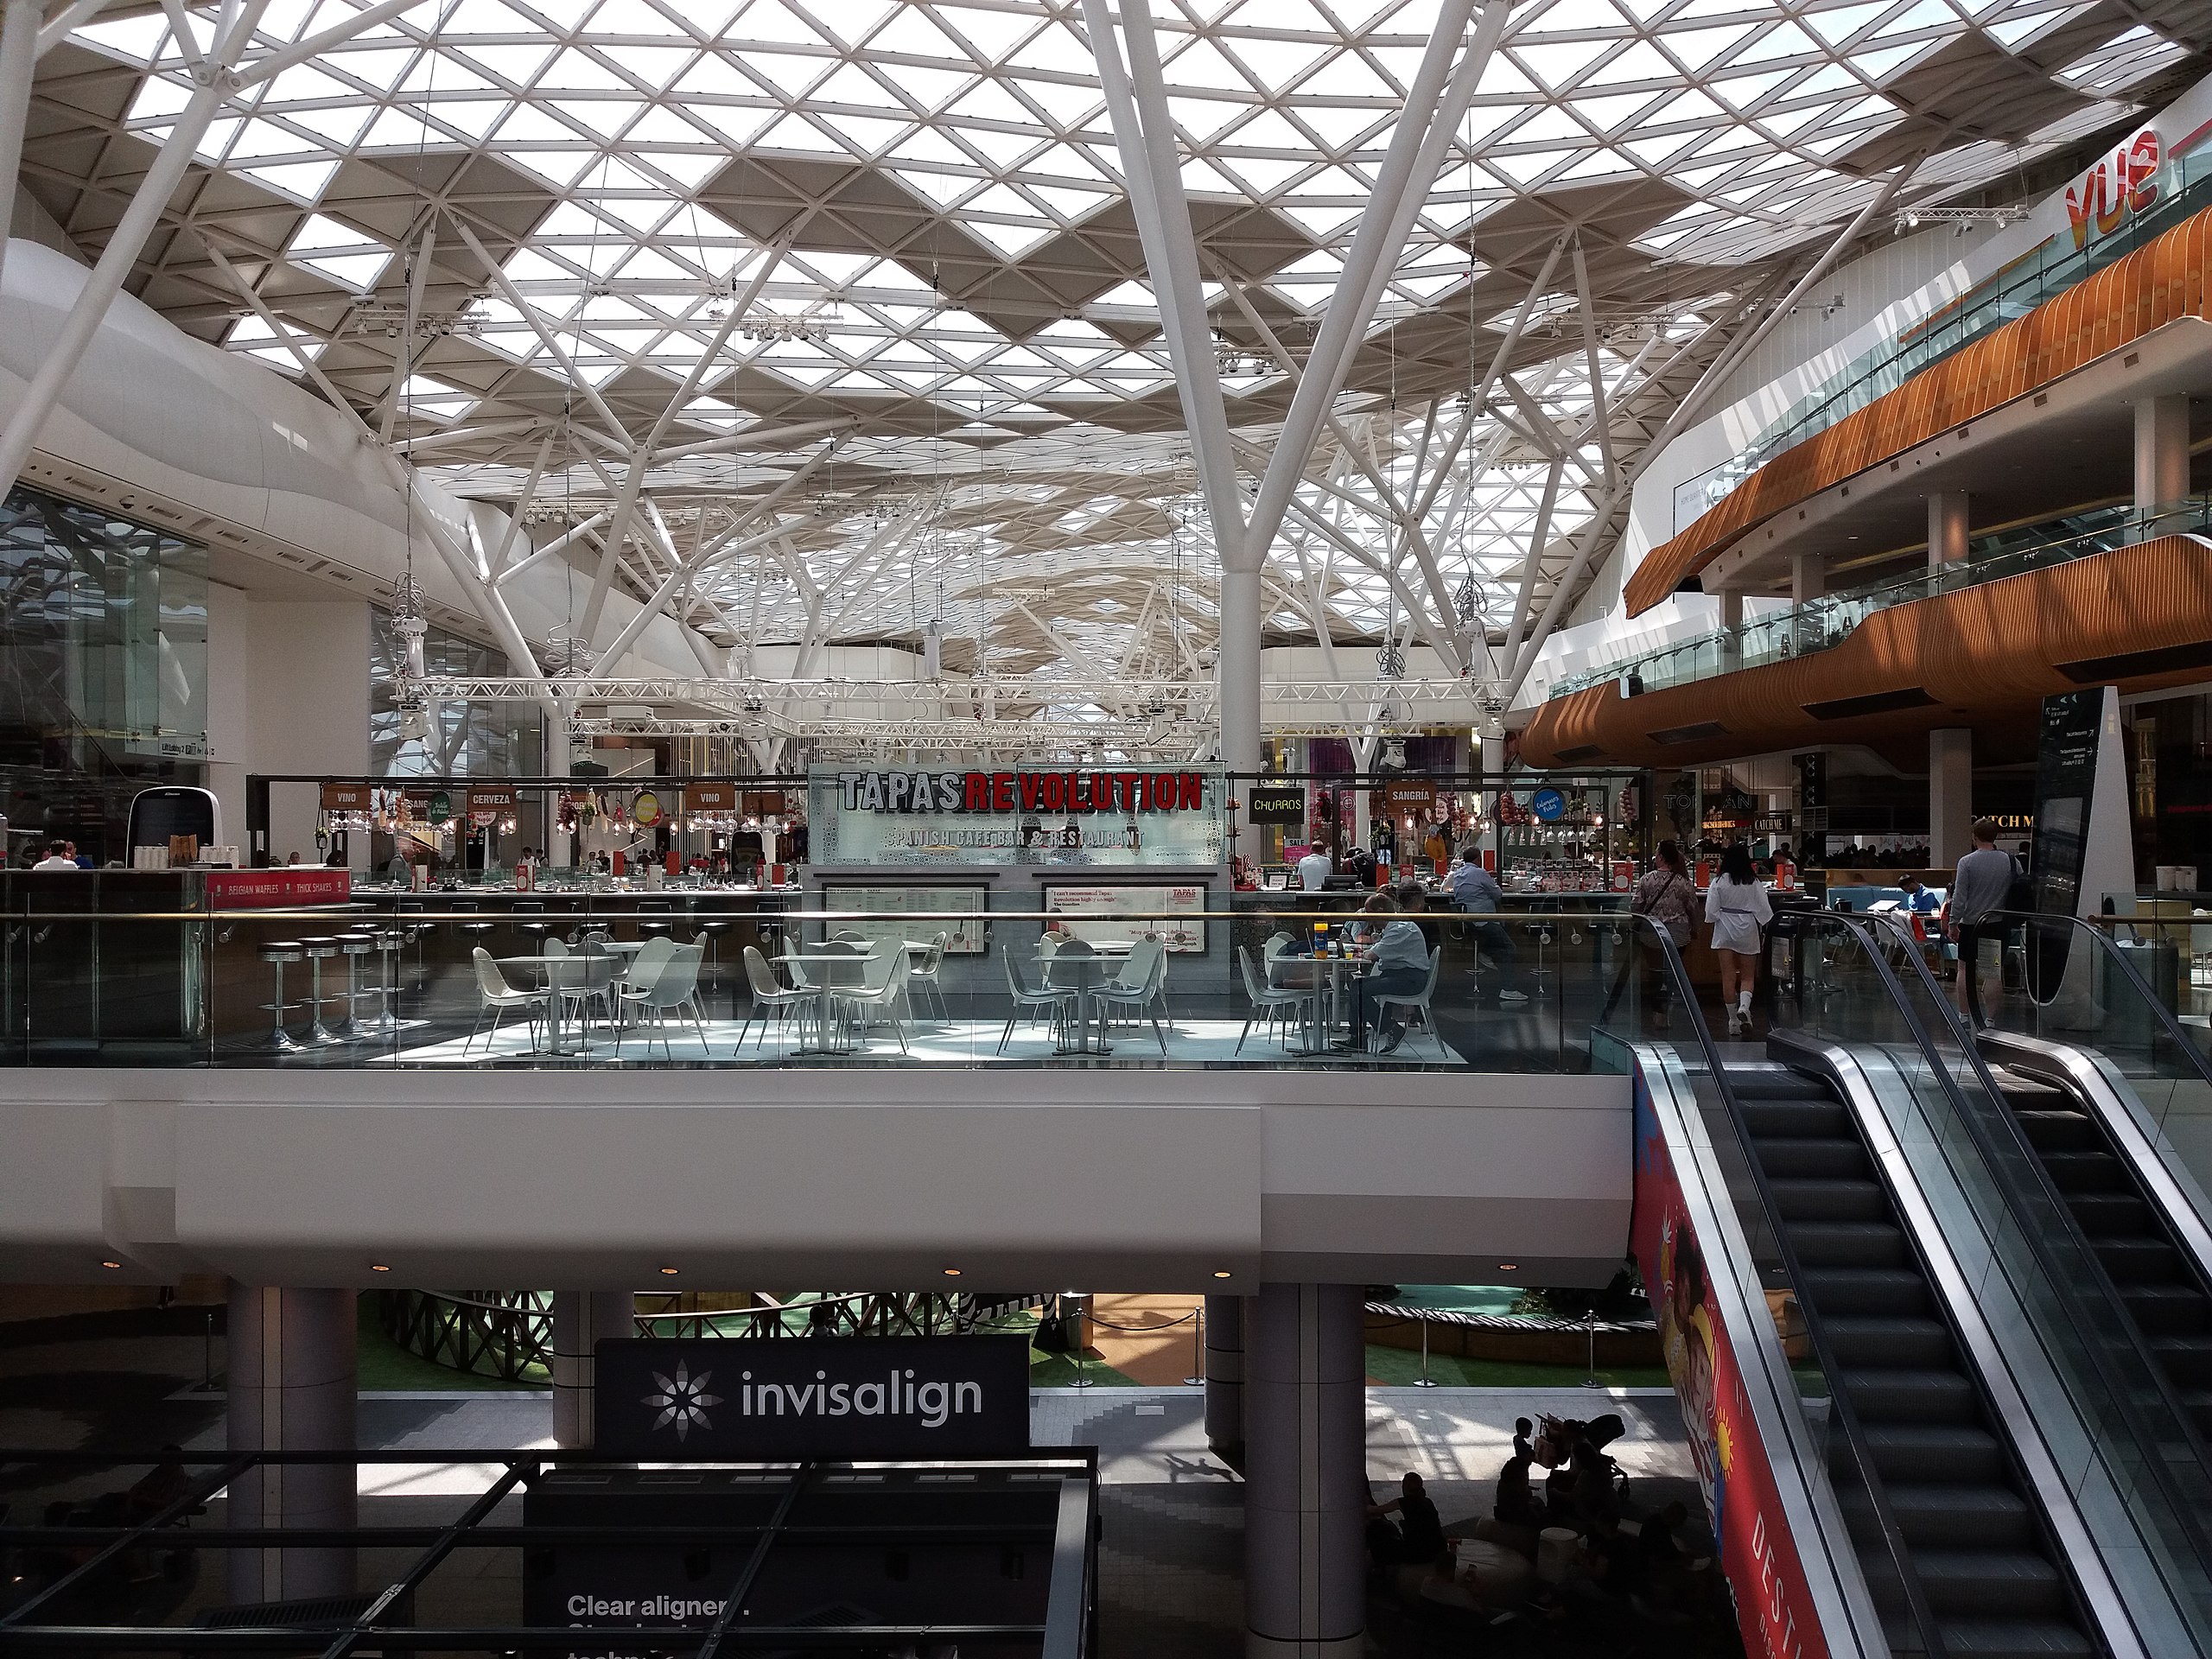 The new rules at Westfield London shoppers will have to follow